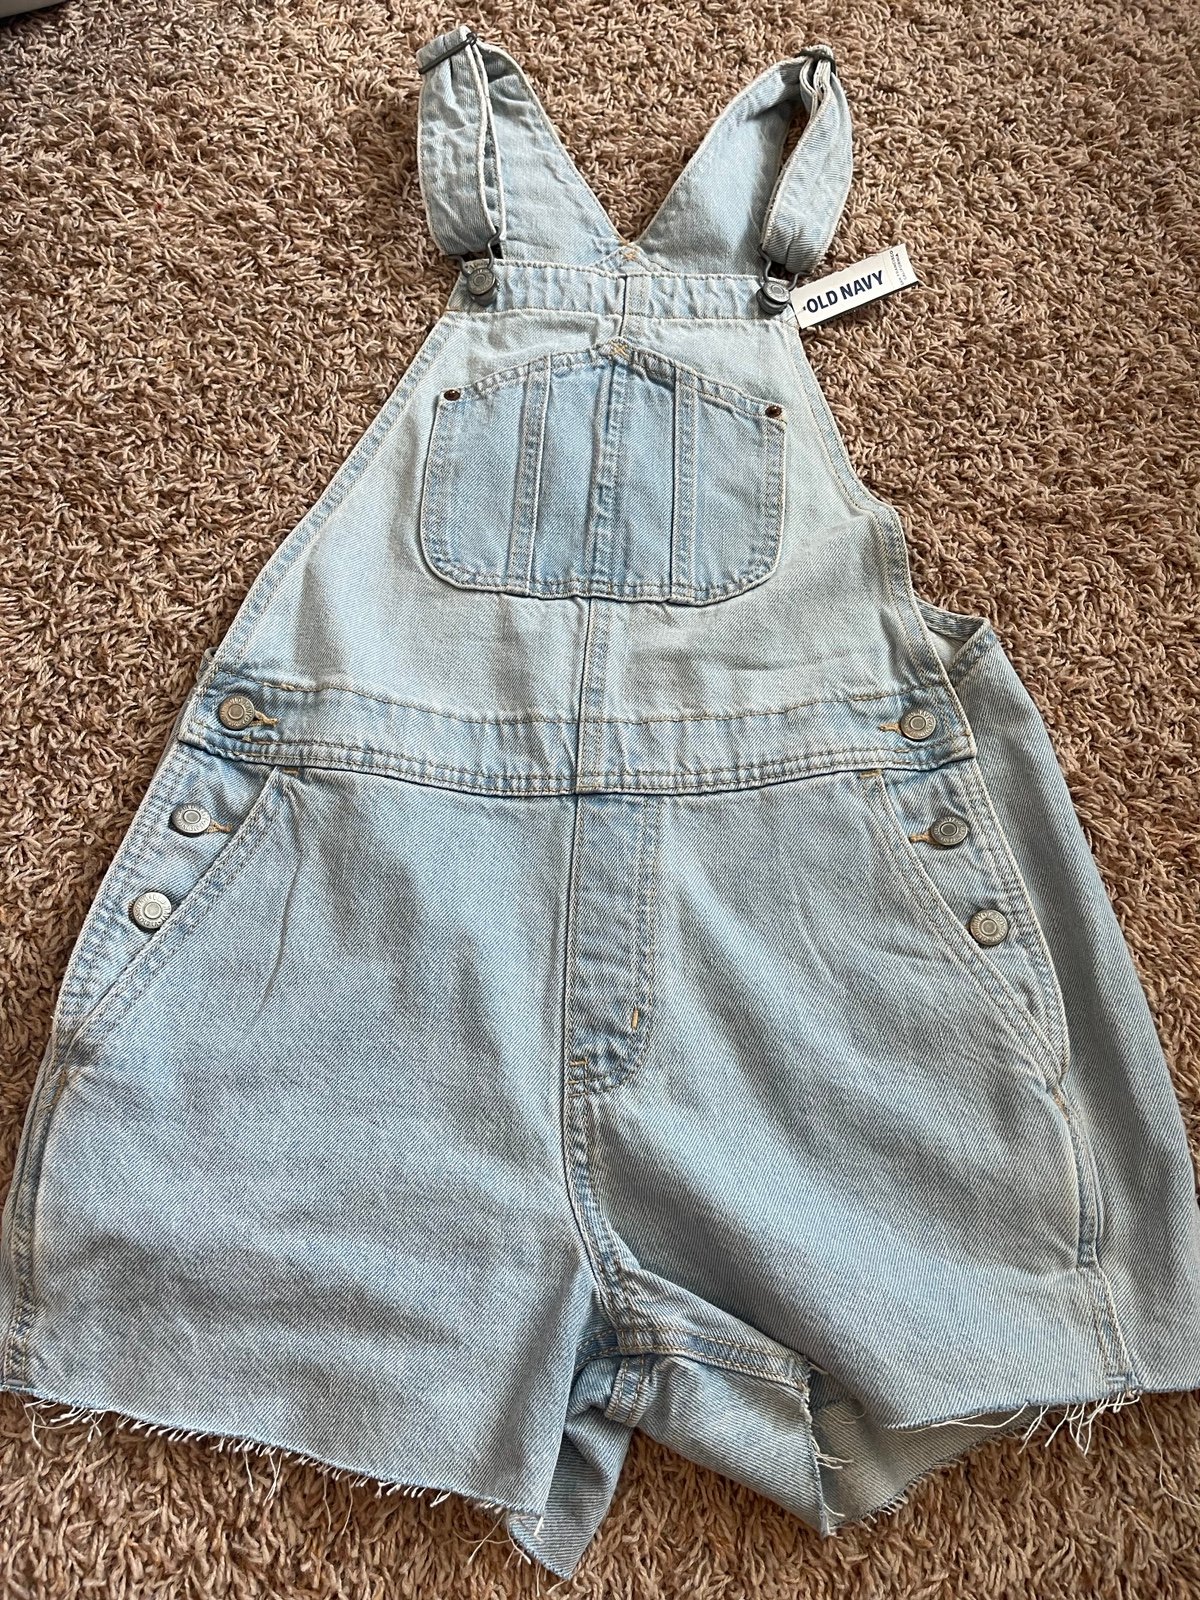 where to buy  old navy overalls JsVPMLnmI hot sale